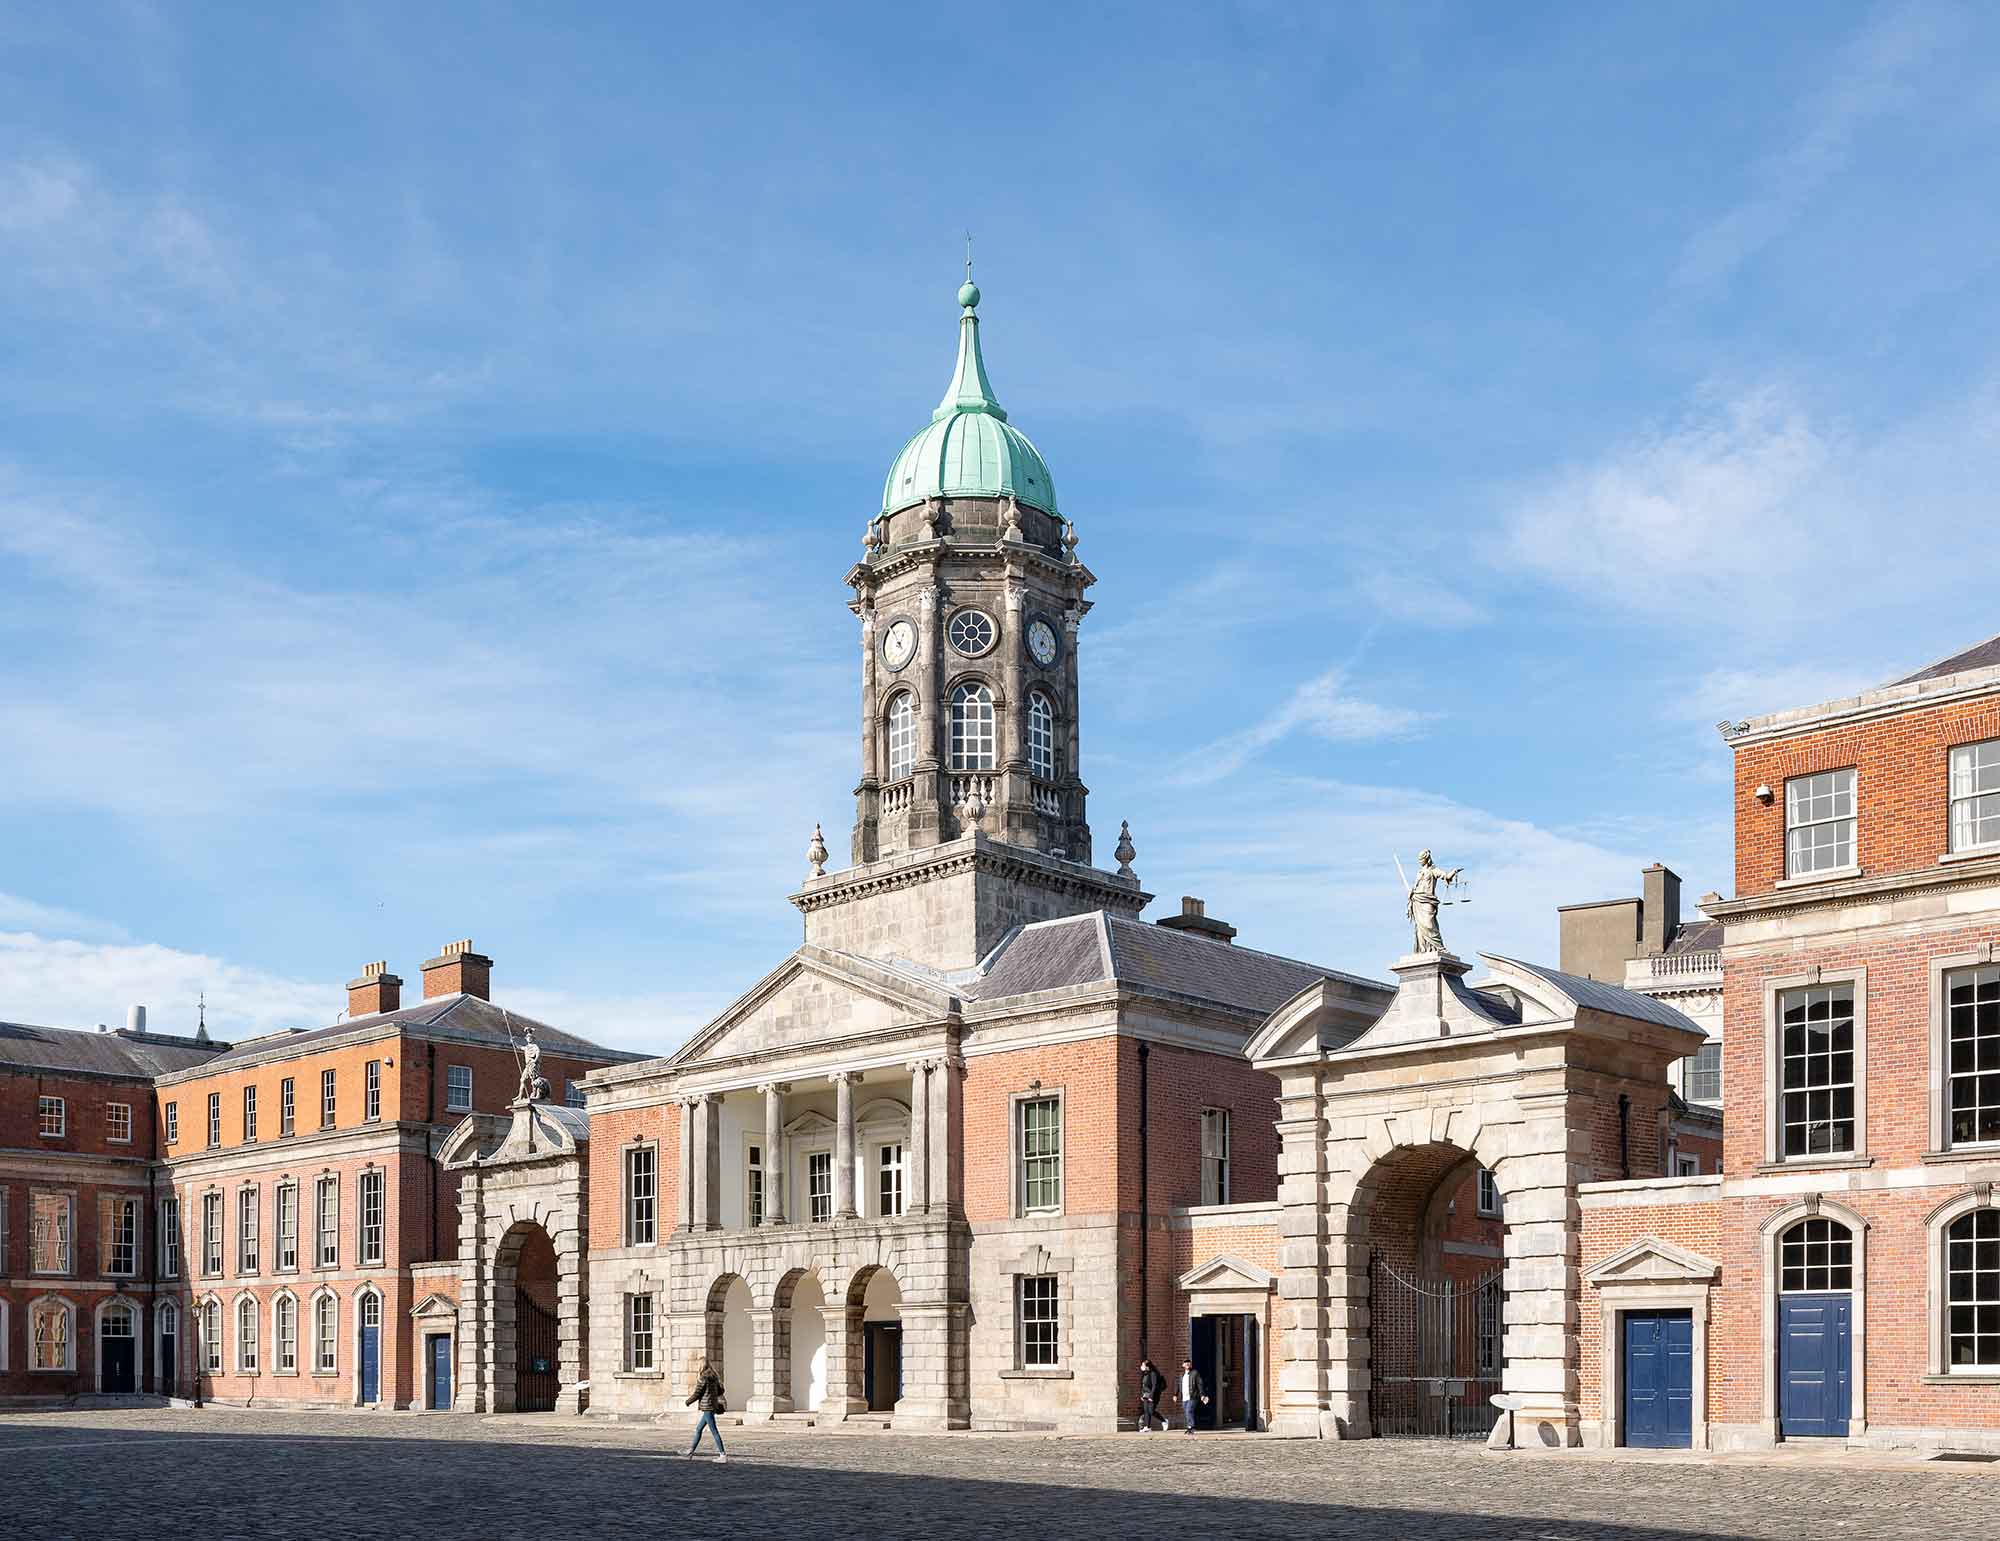 how much to visit dublin castle